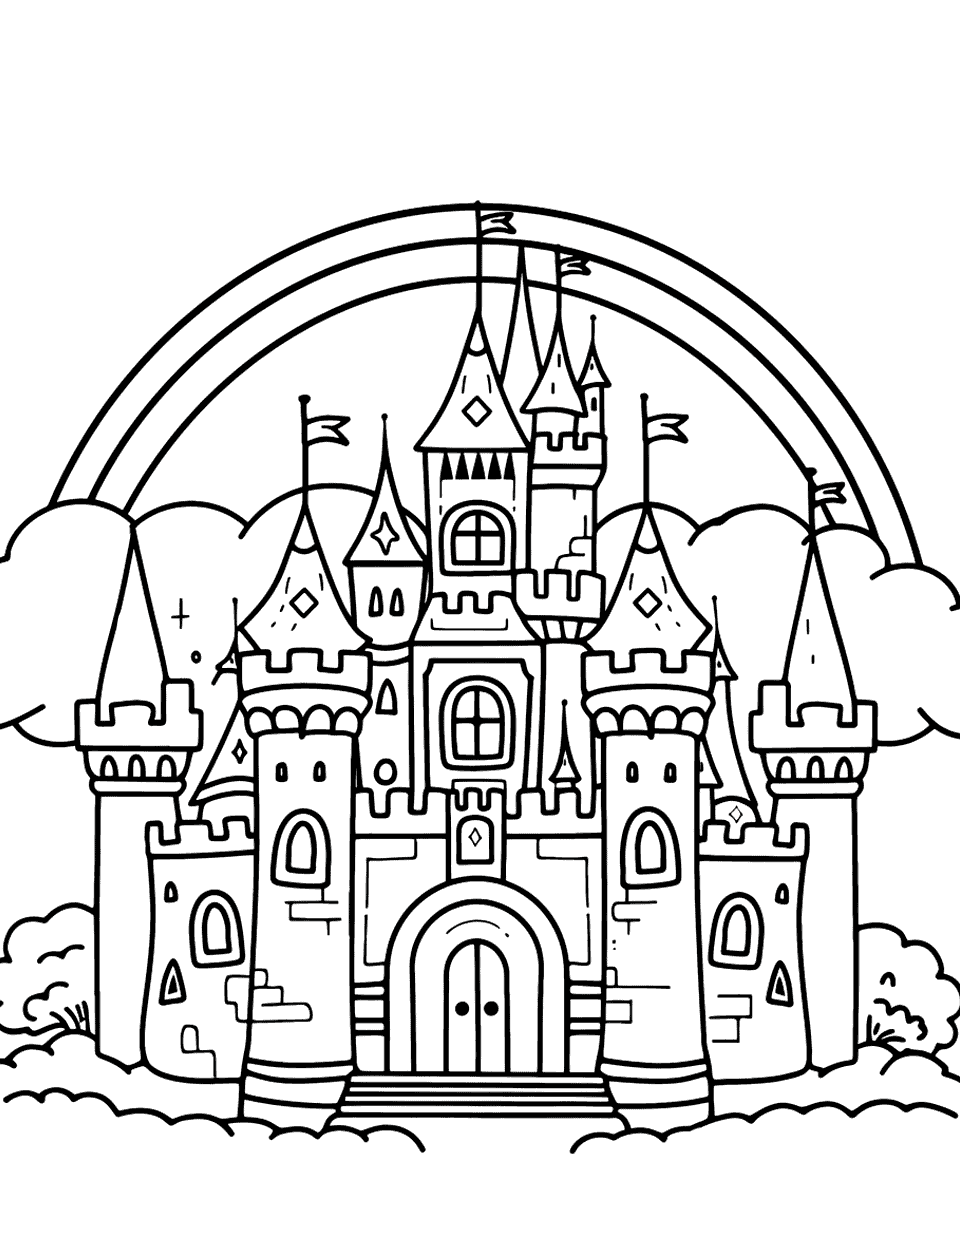 Castle and Rainbow Coloring Page - After a rain shower, a bright rainbow arcs over a cheerful castle.